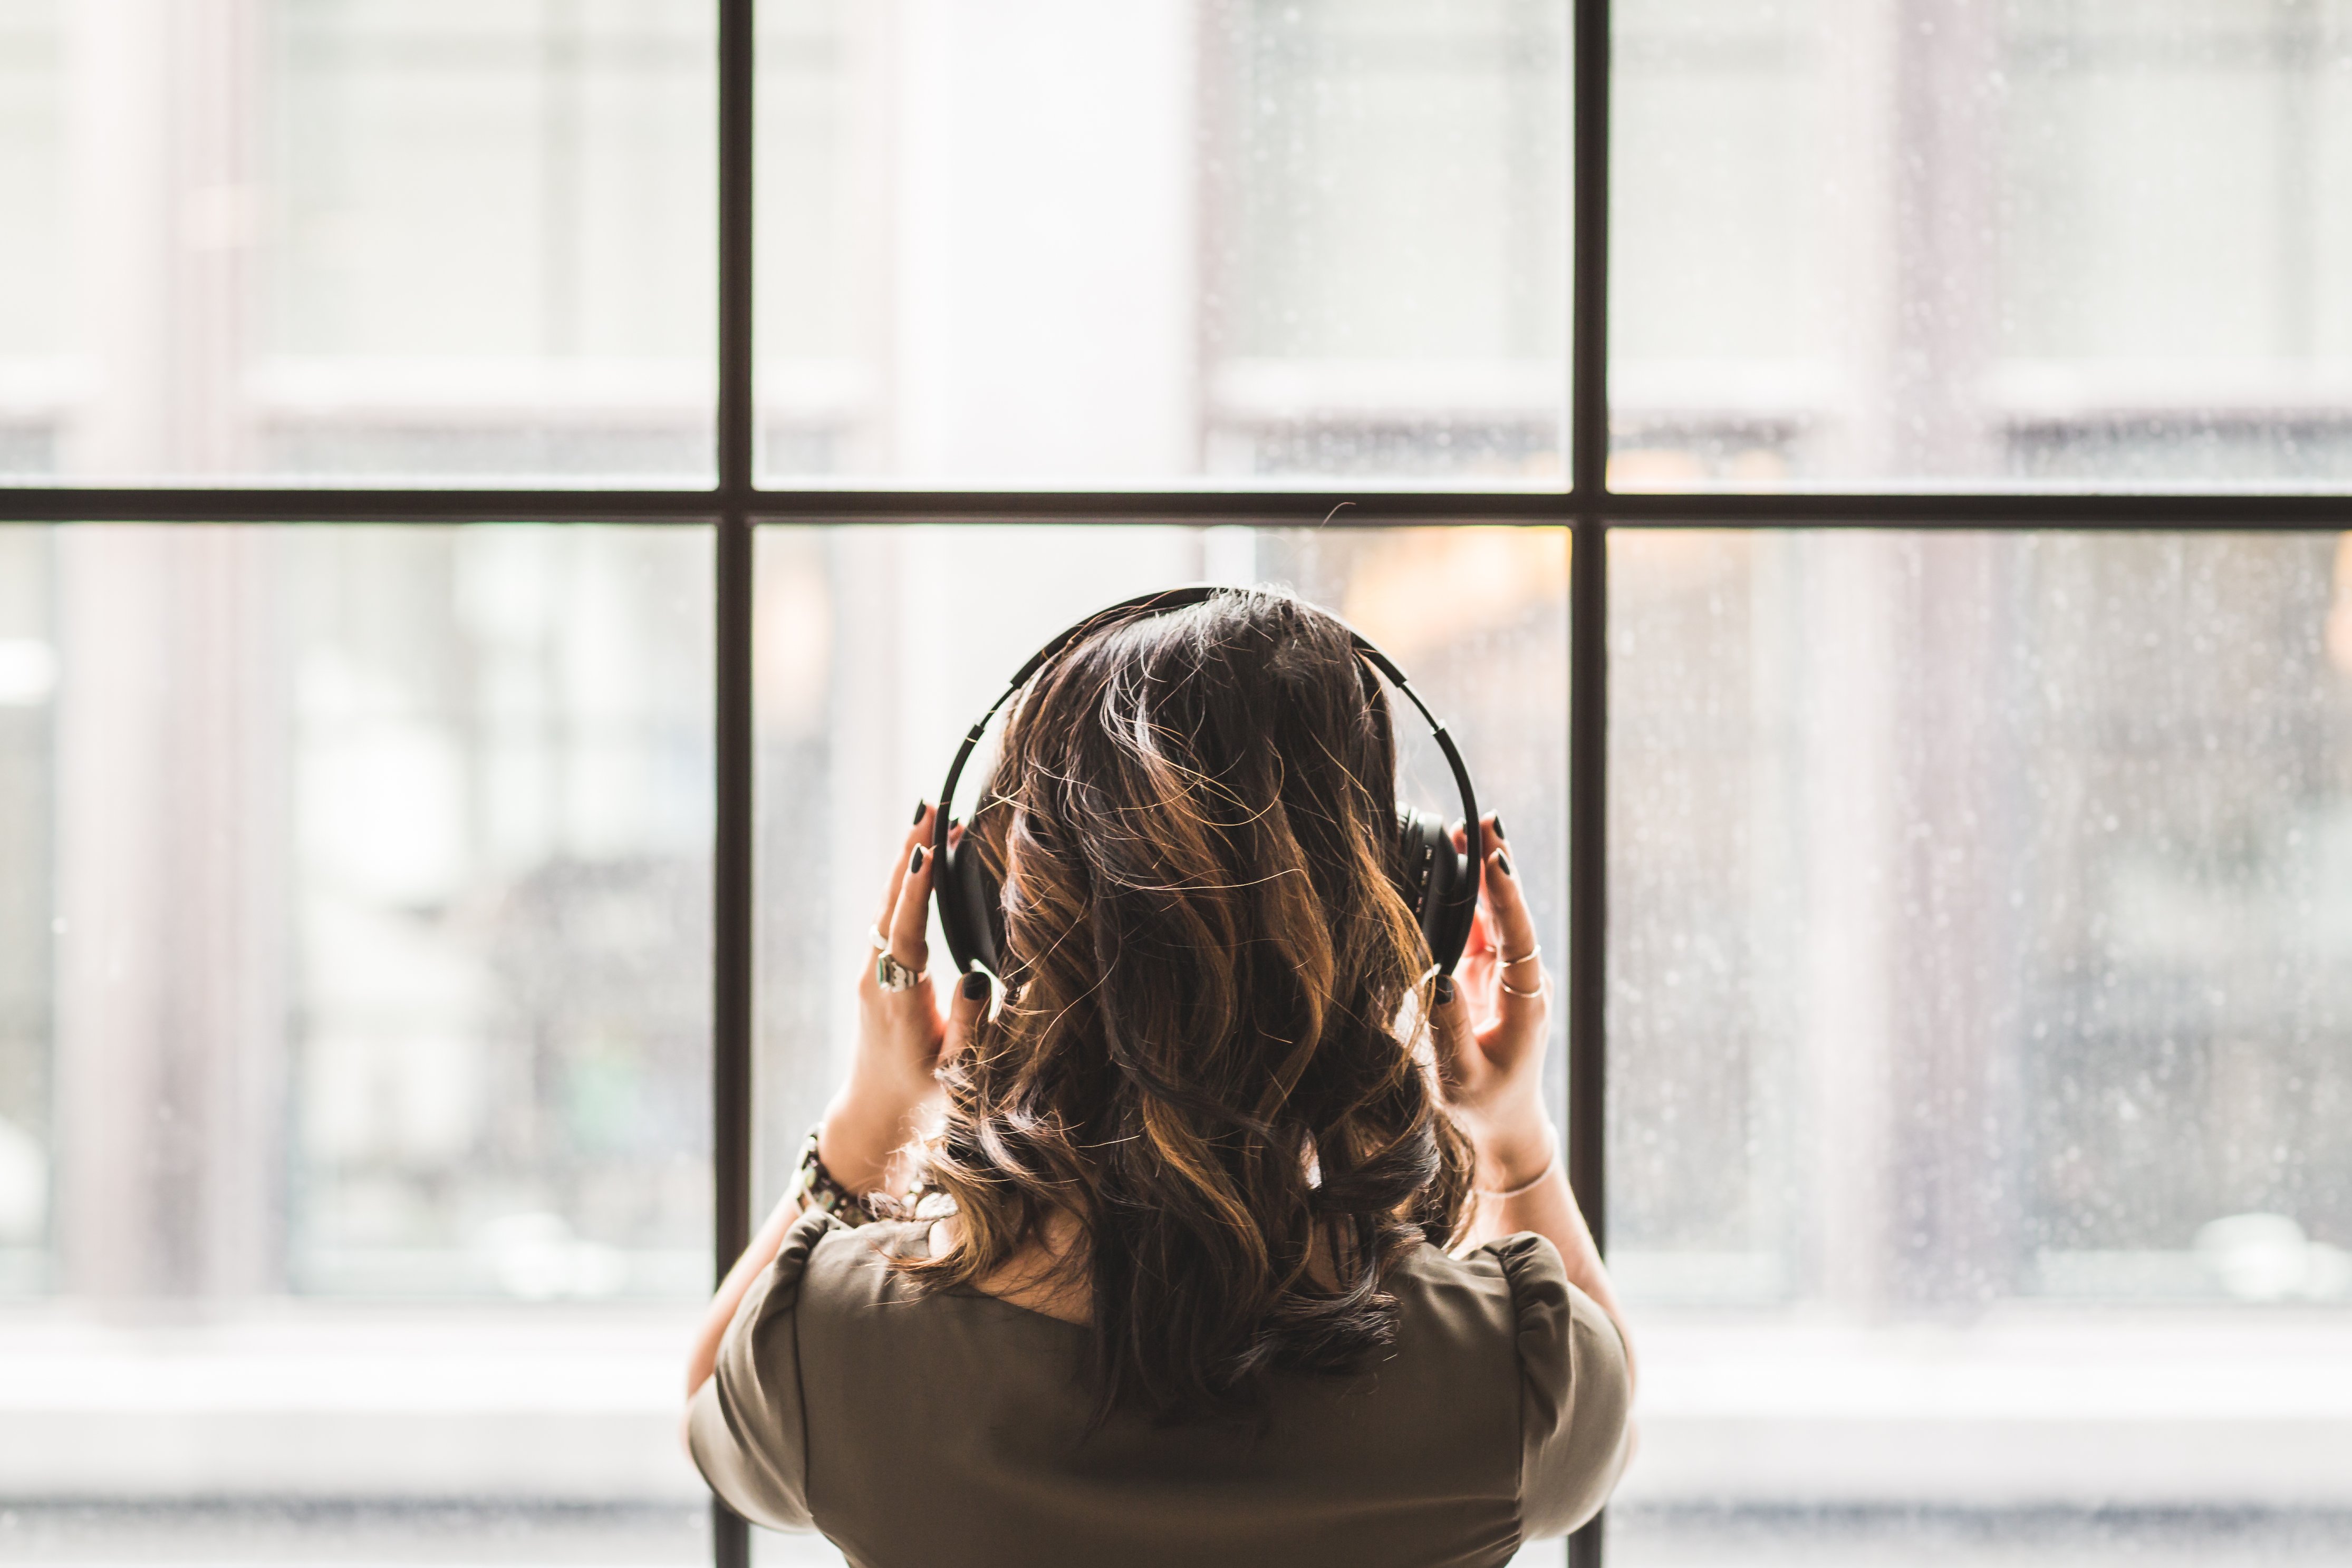 Woman wearing over-the-ear headphones looks out a window